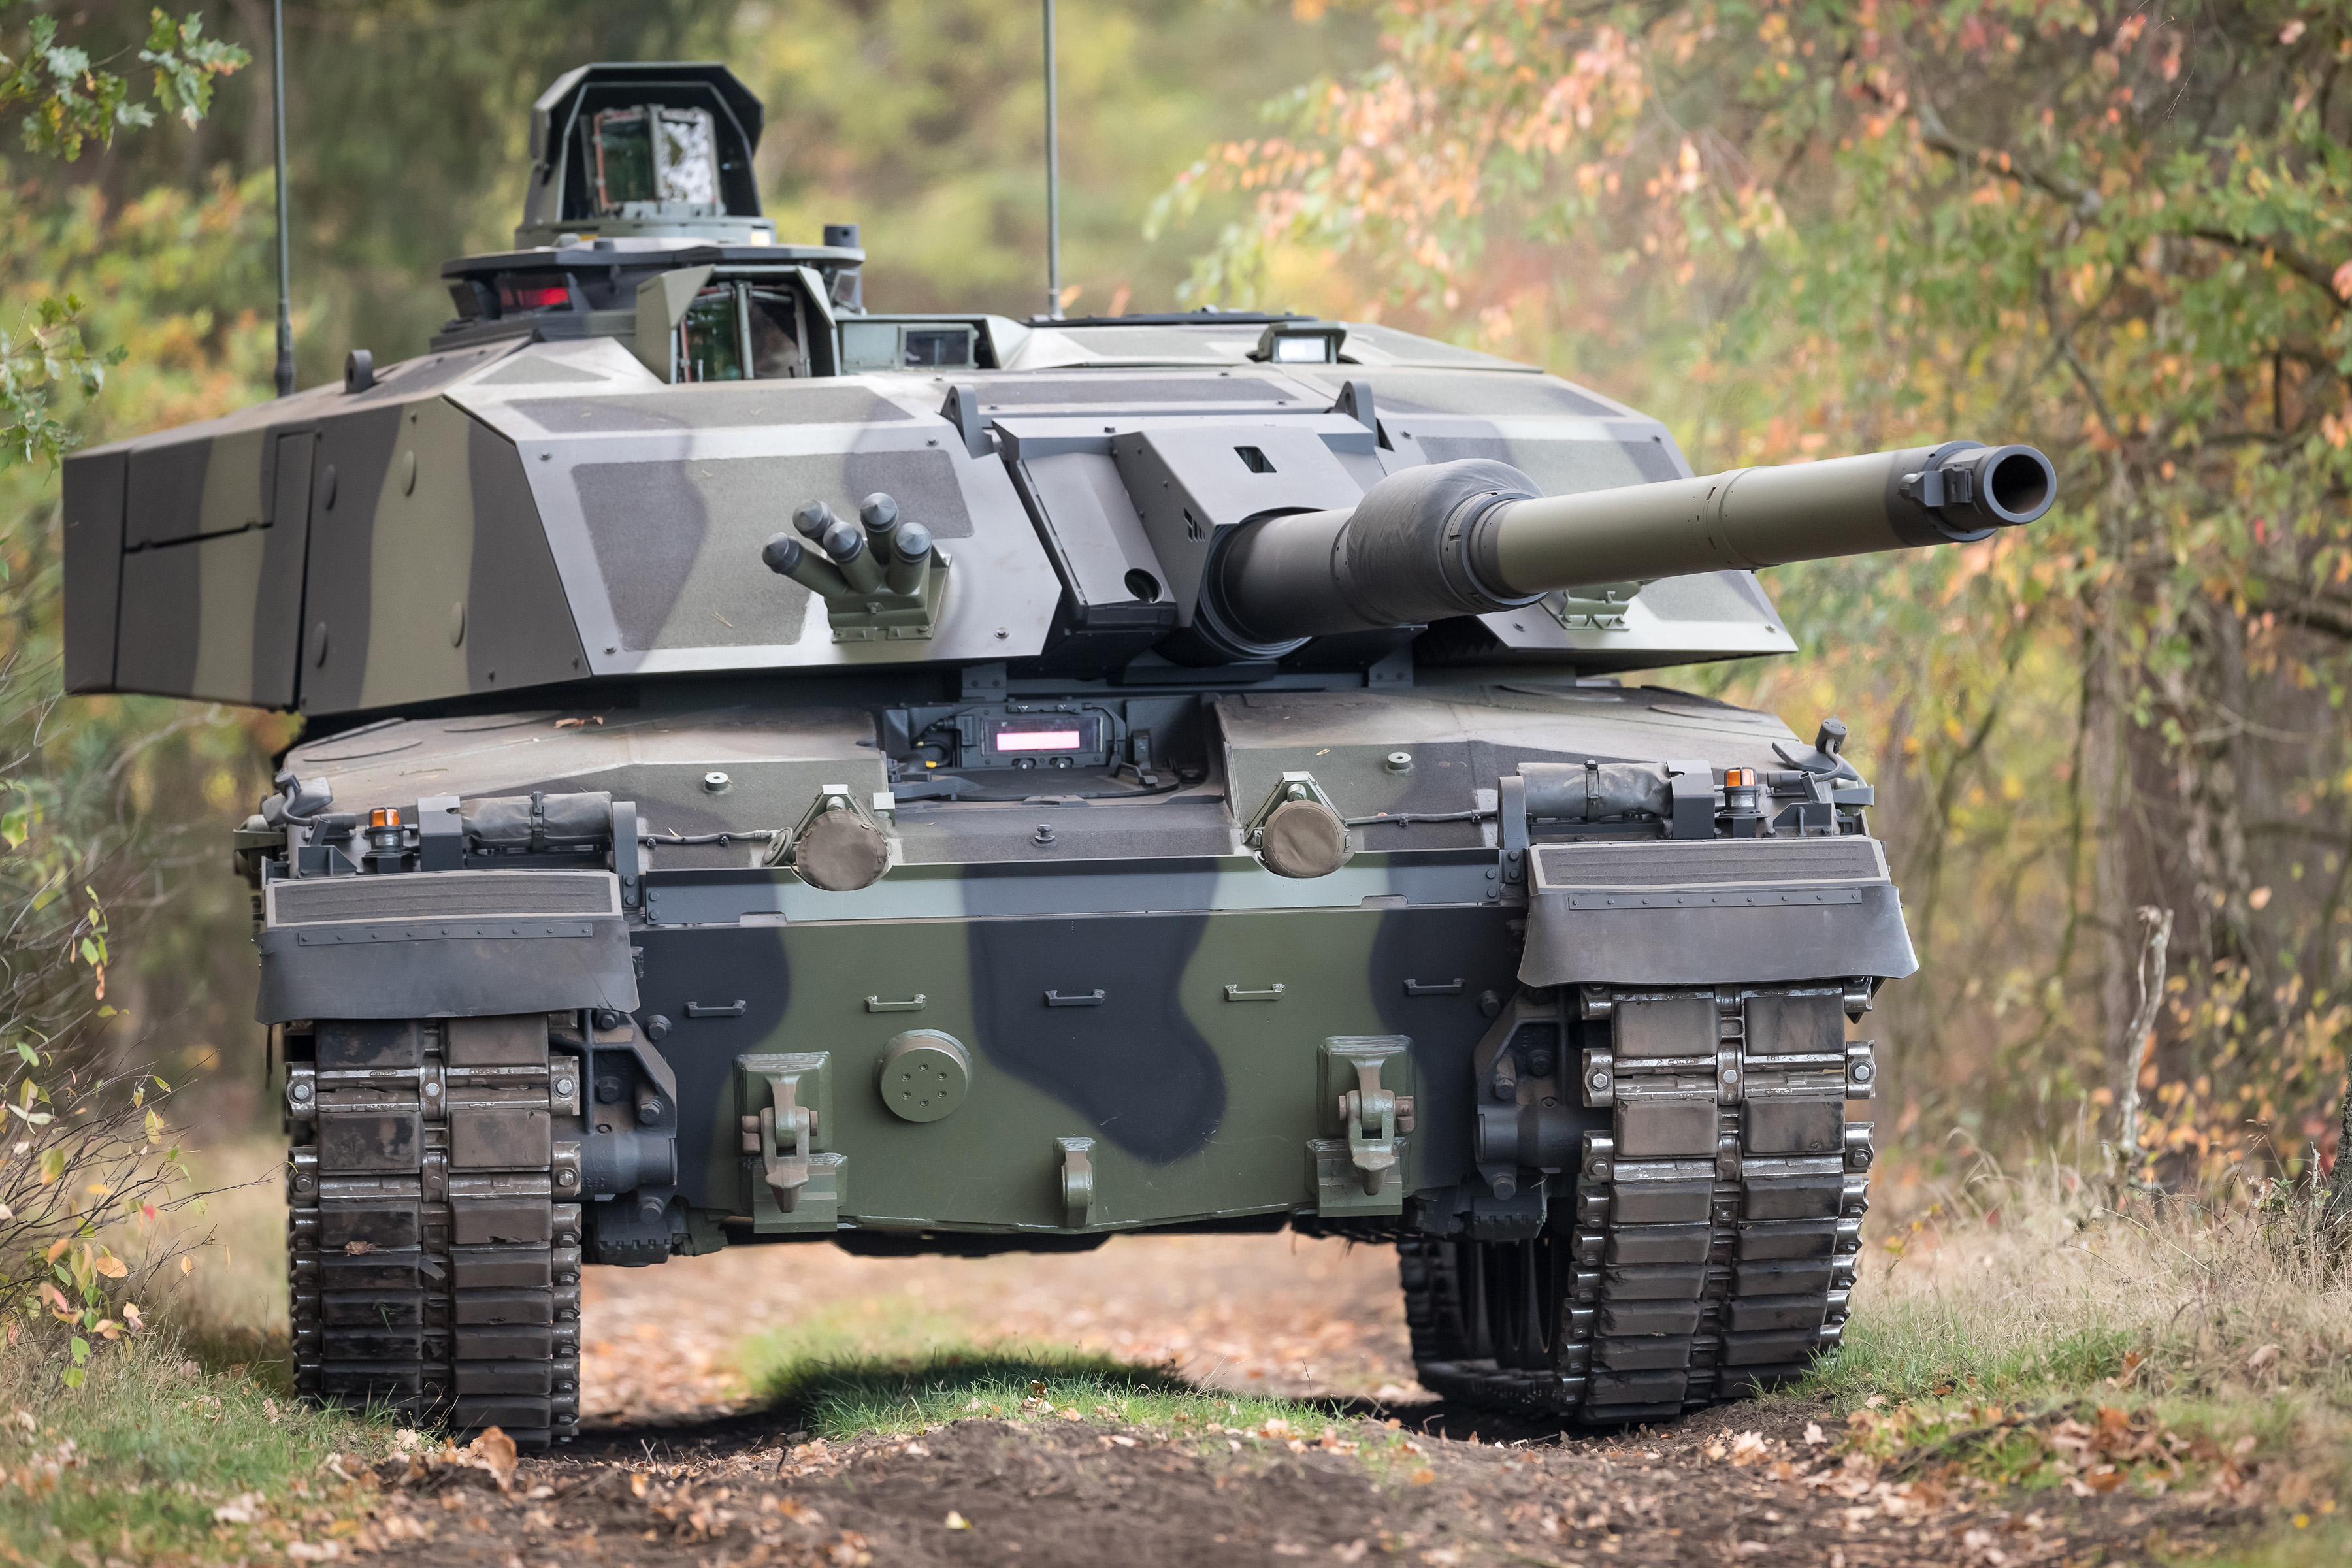 Image of Challenger 3, during turret demonstrator trials in Unterlüß, Germany on the 22 October 2018.A major upgrade of the British Army’s main battle tank featuring extra fire-power and cutting edge protection systems will ensure the UK remains at the forefront of tank design, poised to respond to future global threats and challenges.A contract with RBSL to deliver 148 Challenger 3 tanks will extend the platform’s out of service date to 2040. It will provide skilled jobs in UK industry, offer export opportunities and will support the case for the UK participation in any future international tank programmes.The overhaul will include a new 120mm smoothbore gun which uses the most advanced globally available ammunition; a new suite of sights providing tank commanders with enhanced day and night targeting abilities; new modular armour, an active protection system and a turret that can be fitted to the tanks of allies and global partners.As part of the Challenger 3's layered protection, the fleet w